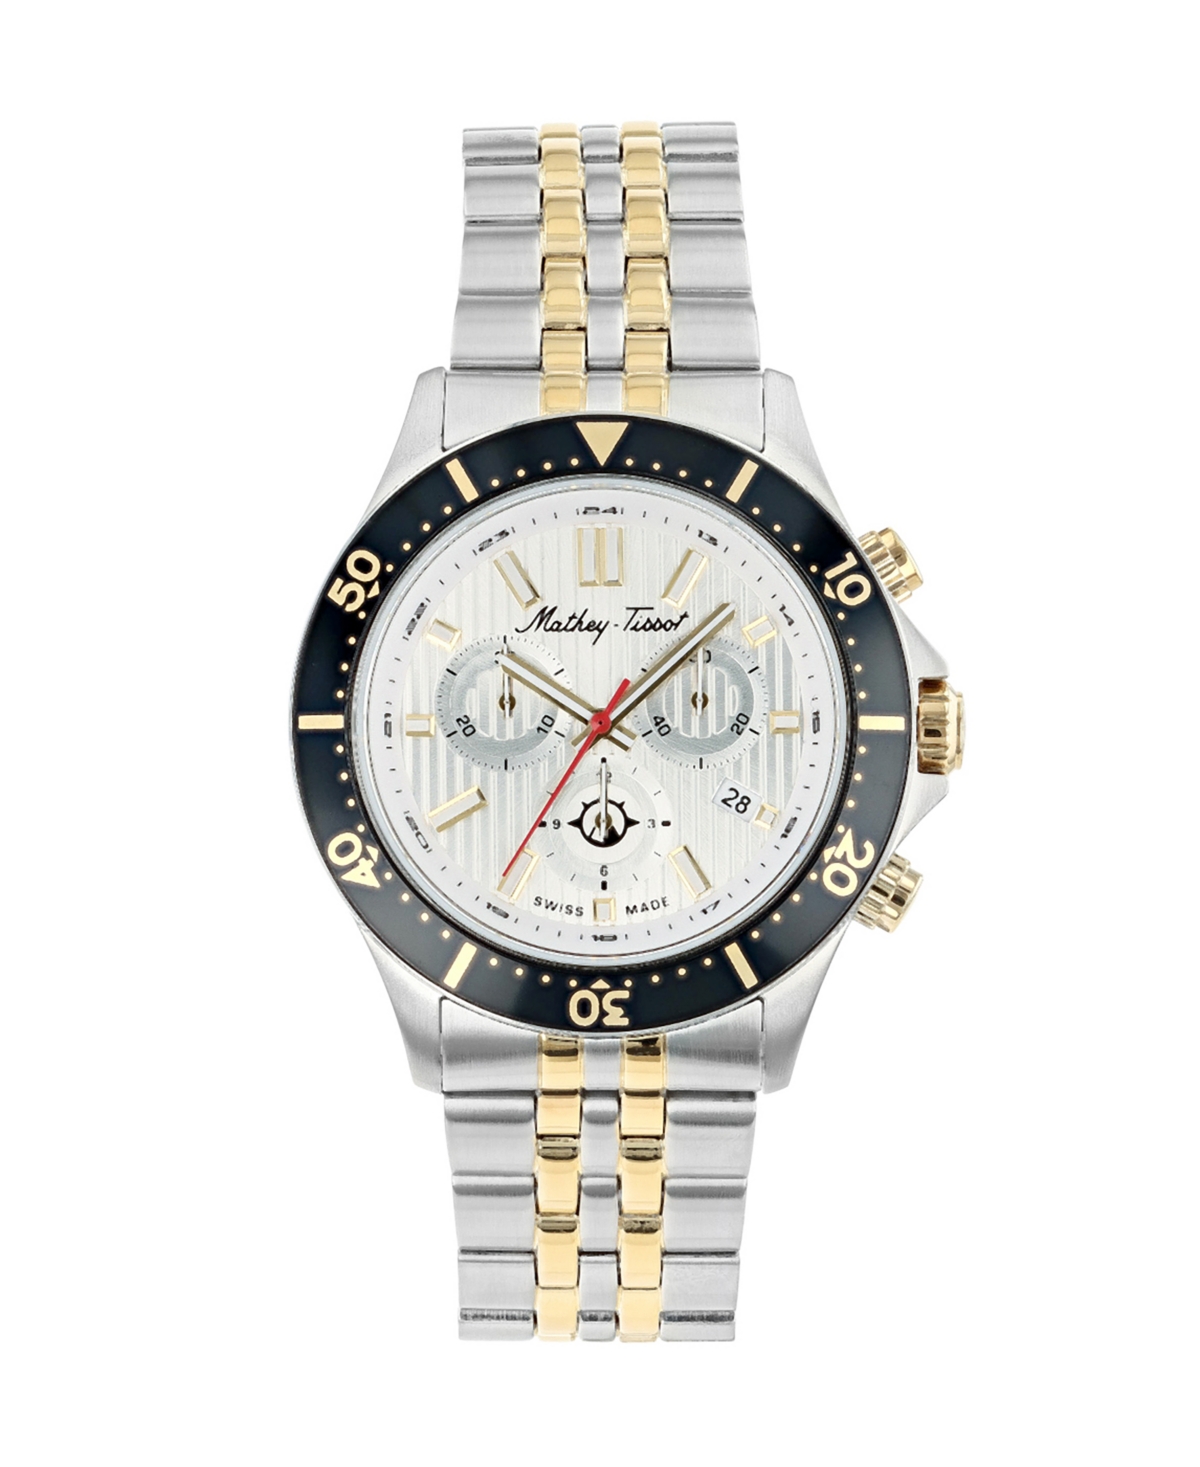 Mathey-Tissot Men's Expedition Chronograph Collection Stainless Steel Bracelet Watch, 43mm